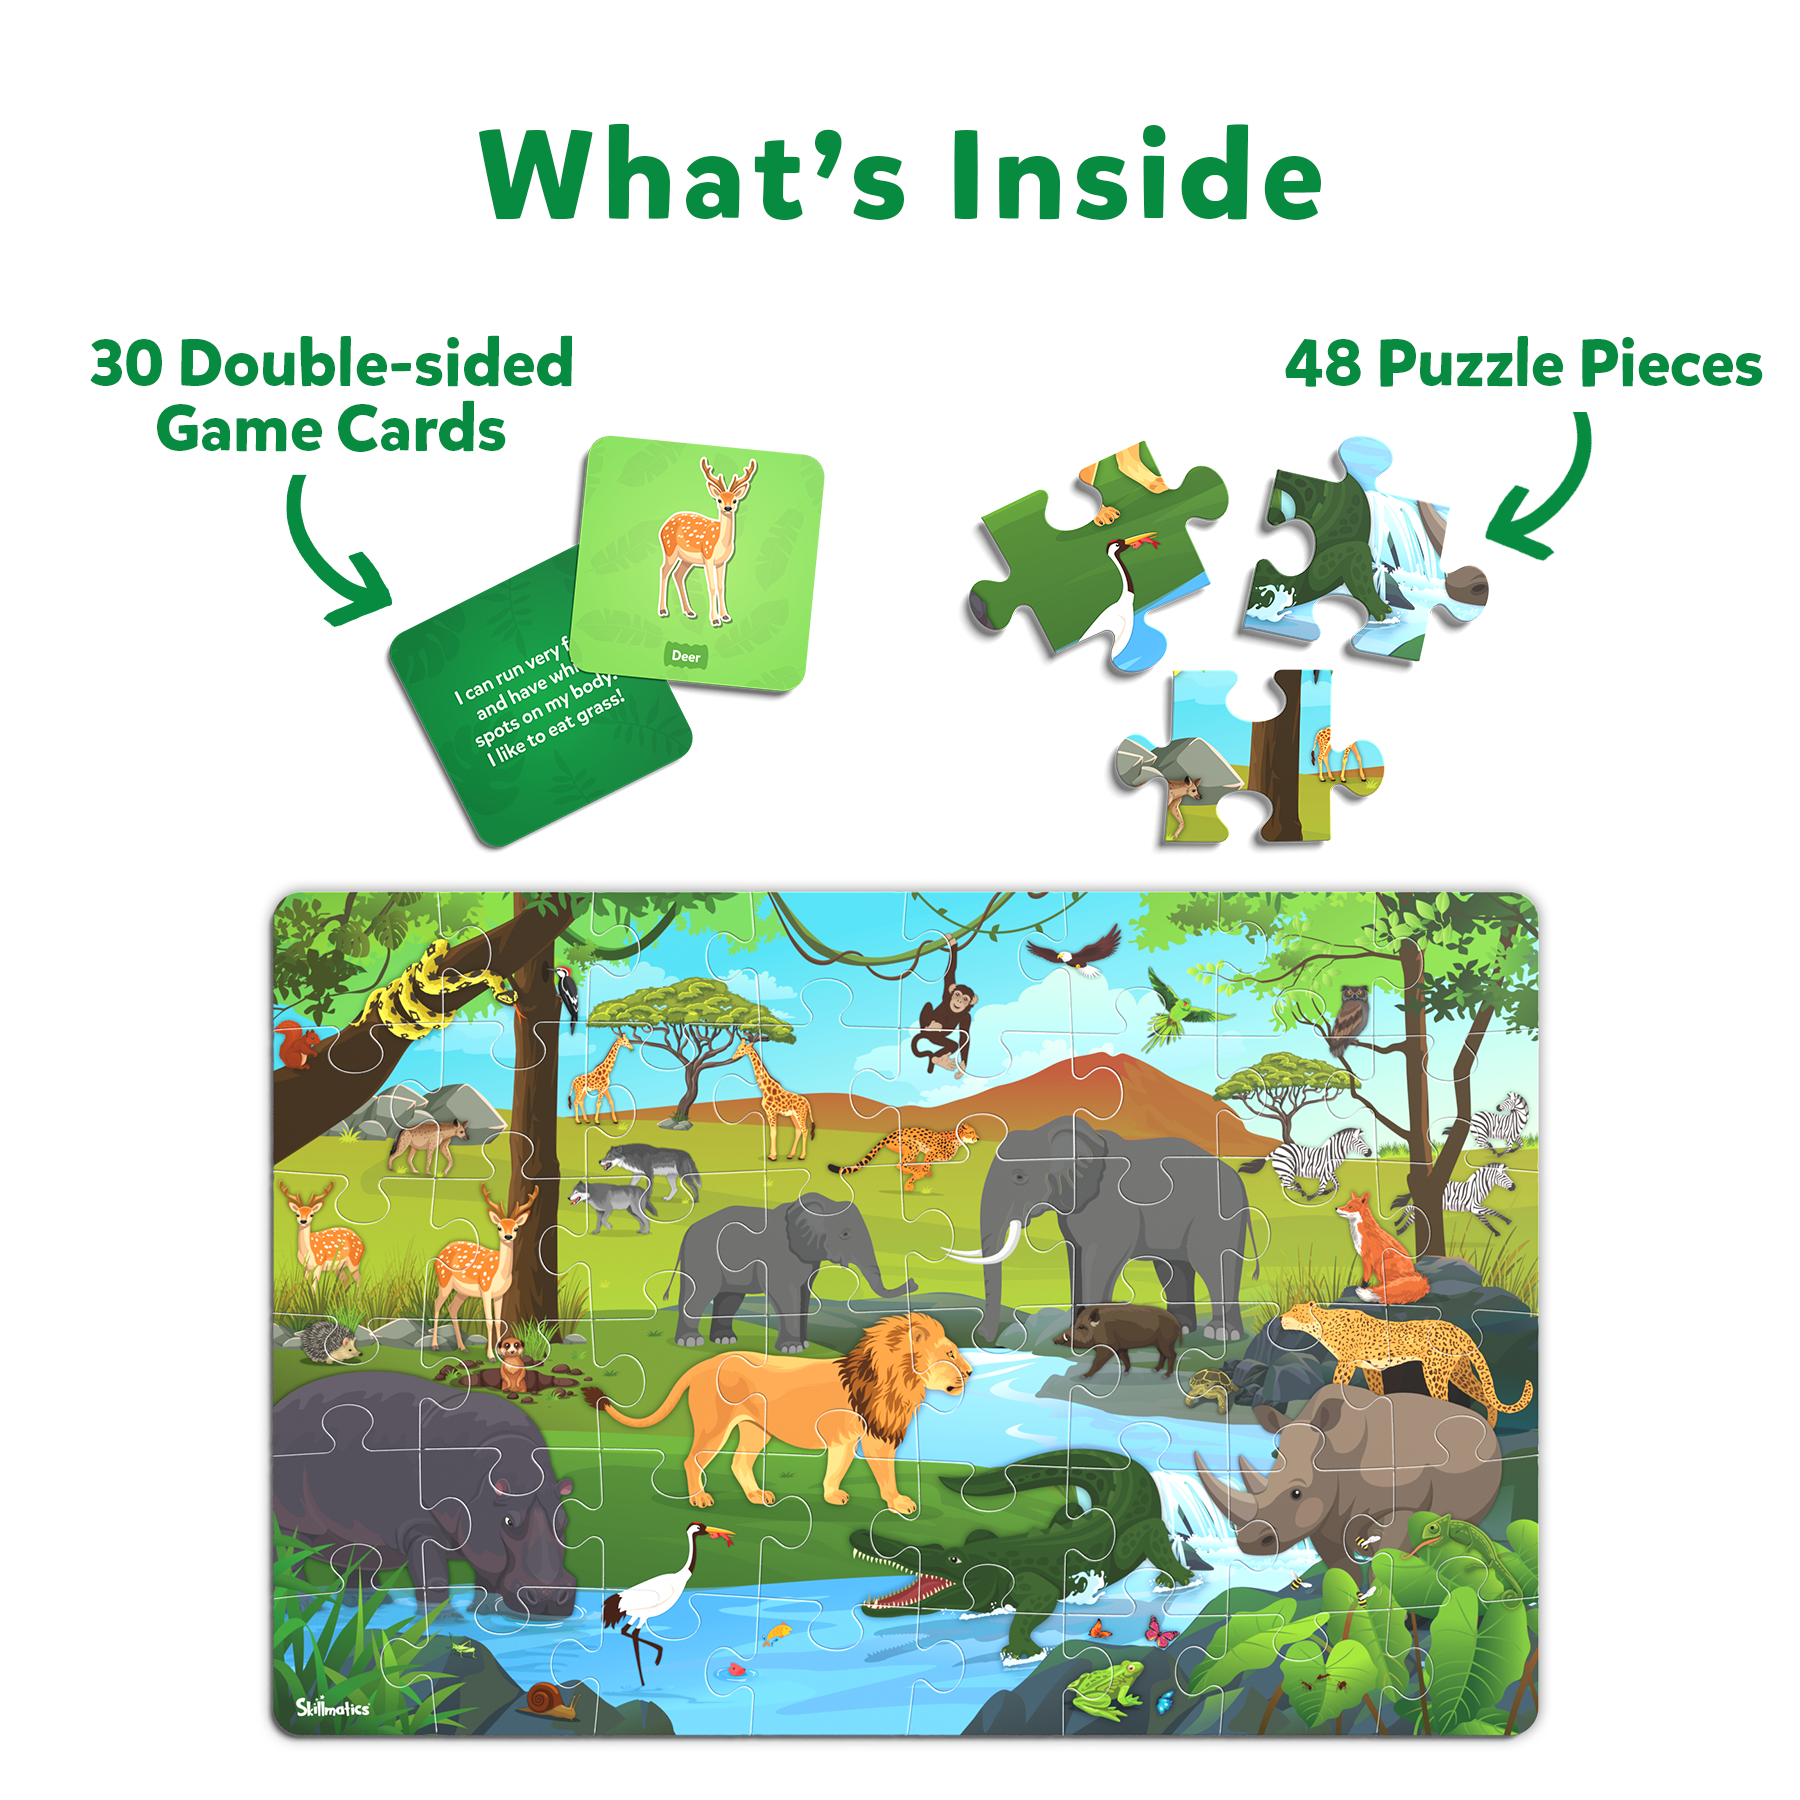 Skillmatics Floor Puzzle & Game - Piece & Play Wild Animals, Jigsaw Puzzle (48 Pieces, 2 X 3 Feet), Ages 3 To 7